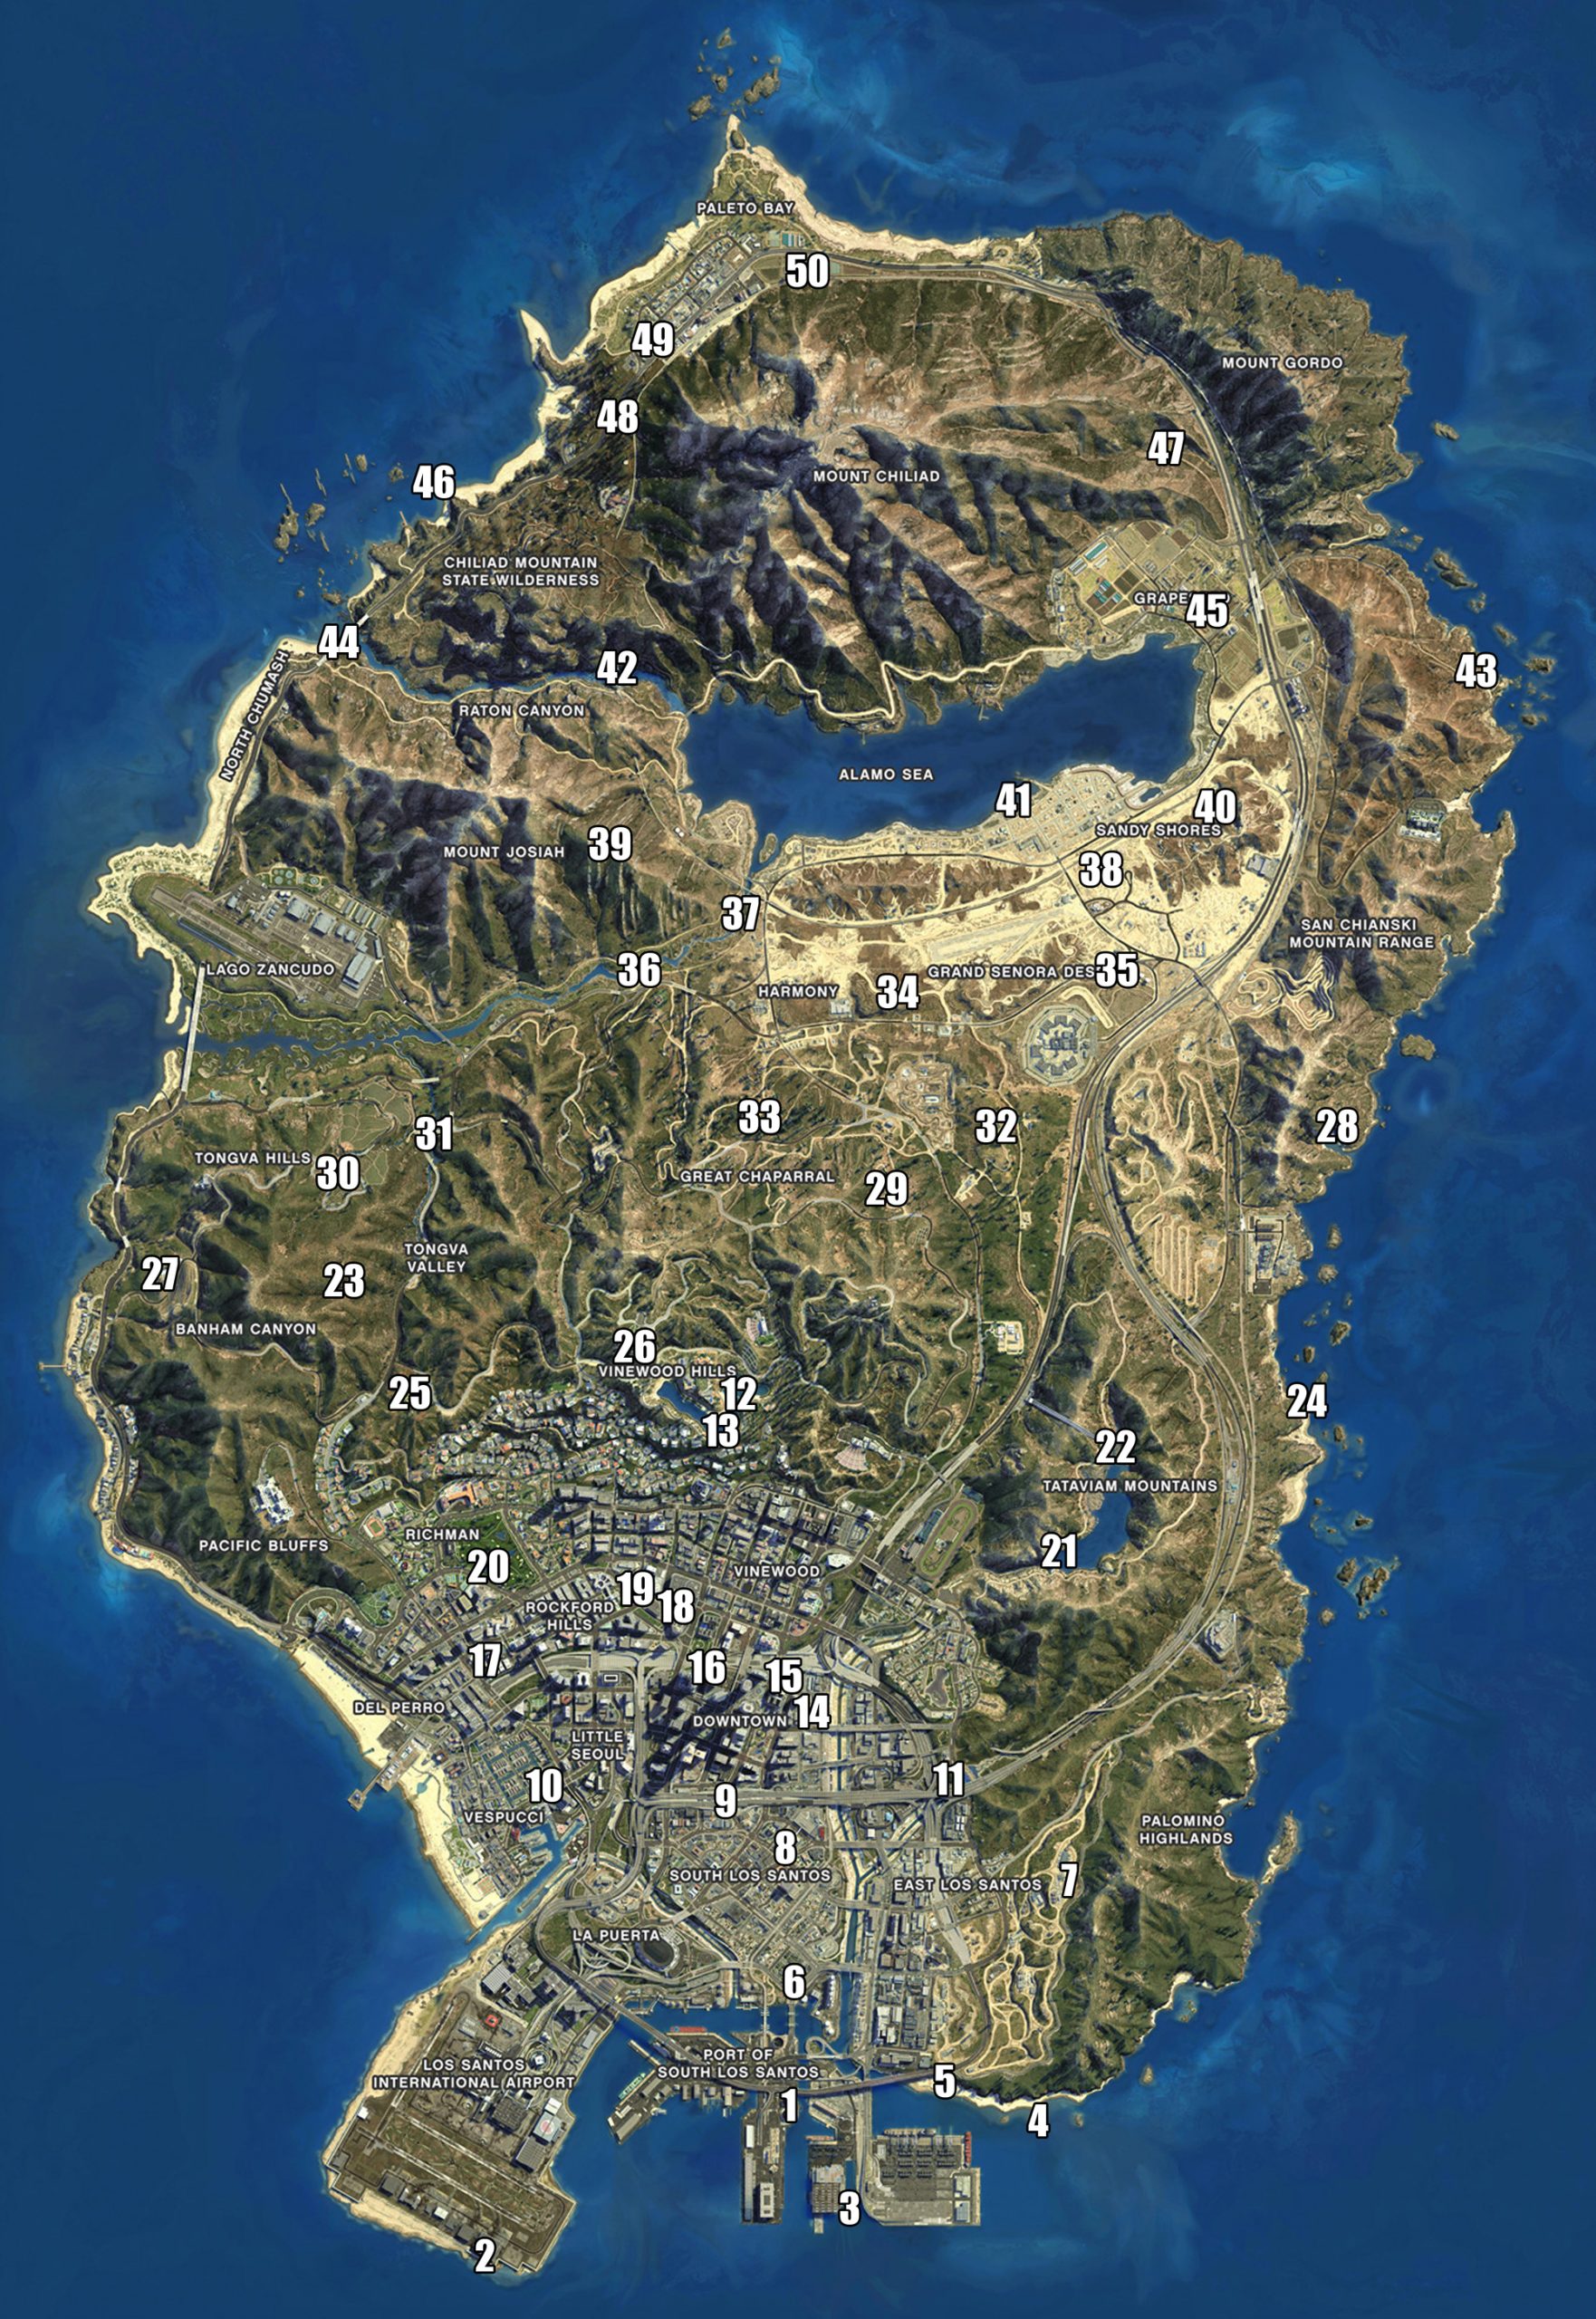 GTA V (5) Spaceship Parts Locations map - Your Games Tracker